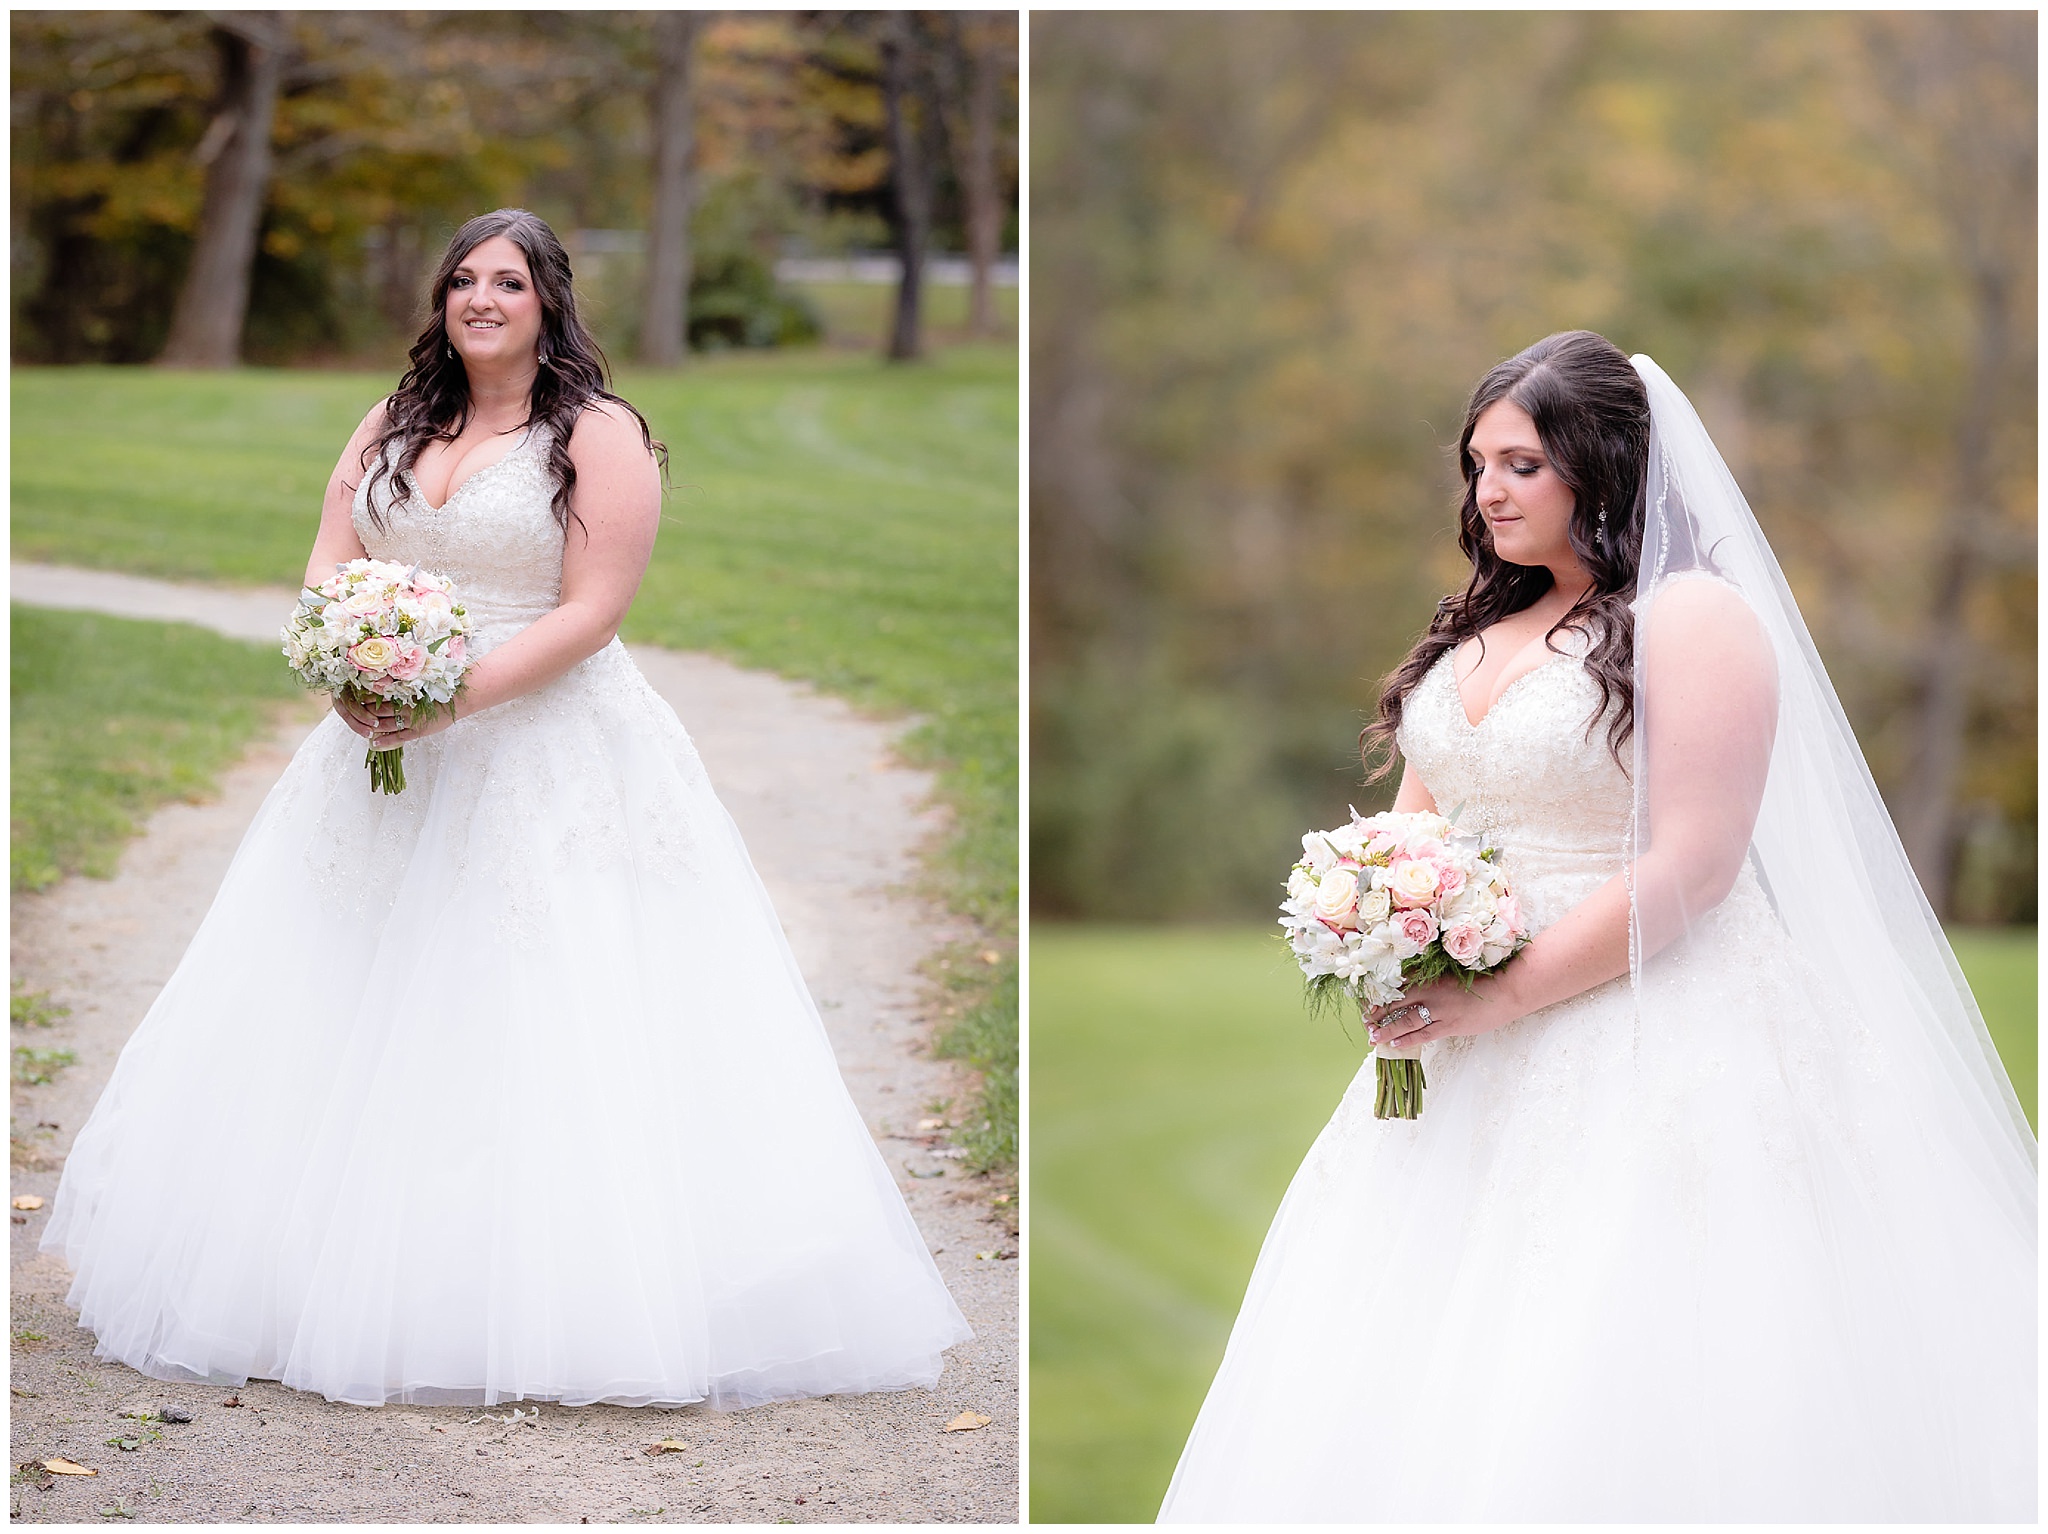 Bride wears an Allure bridal gown from Sorelle Bridal Salon and a bouquet from Angels Floral & Gifts